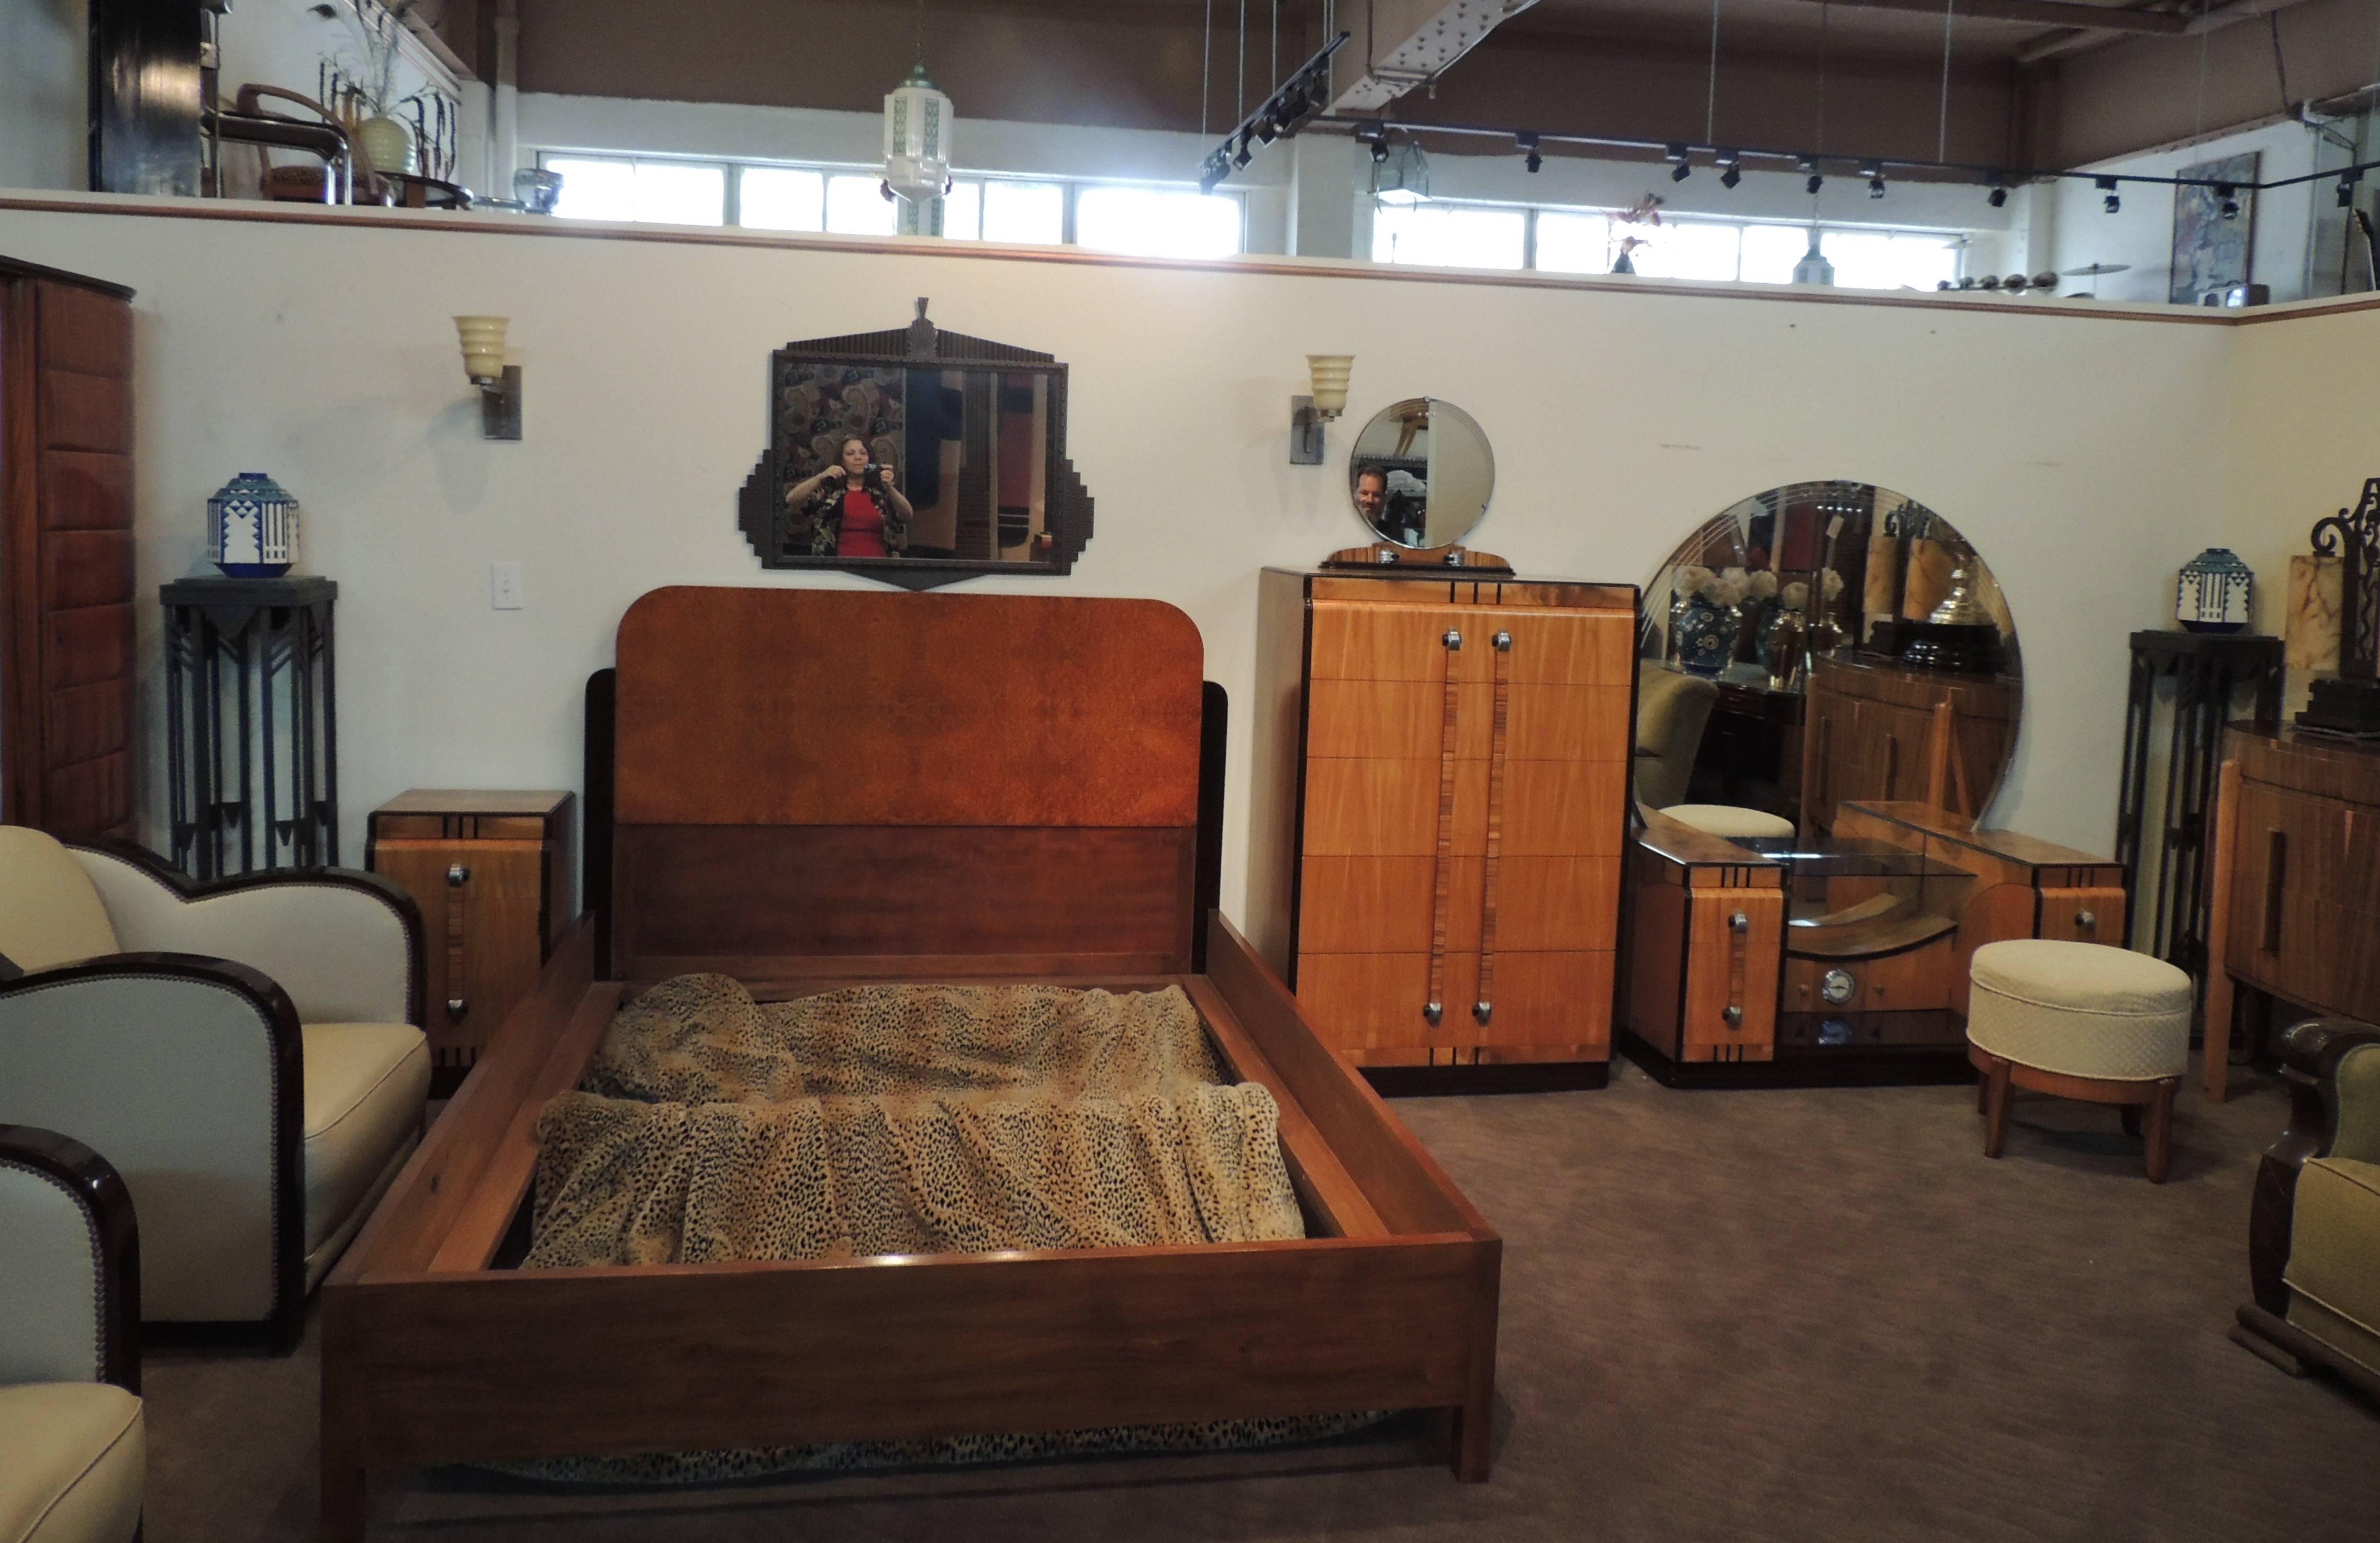 American Art Deco modernist streamline bedroom suite by Leo Jiranek has been recently restored and refreshed. This stunning five piece suite, with multiple wood veneers, outrageous metal hardware and wonderful mirrors consists of a tall dresser